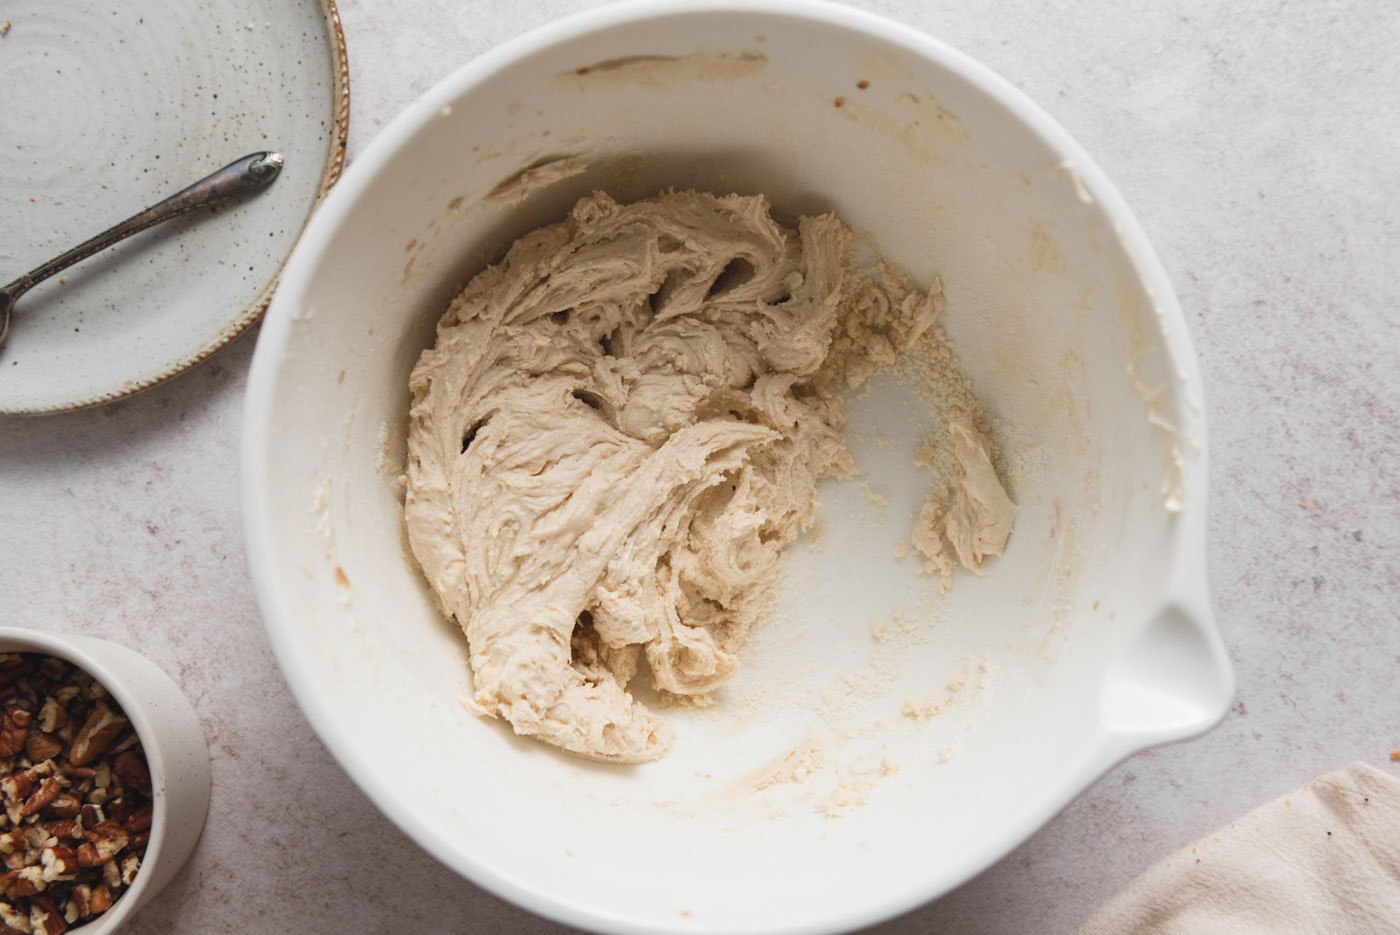 Flour, sugar and butter mixed into a dough in a mixing bowl.